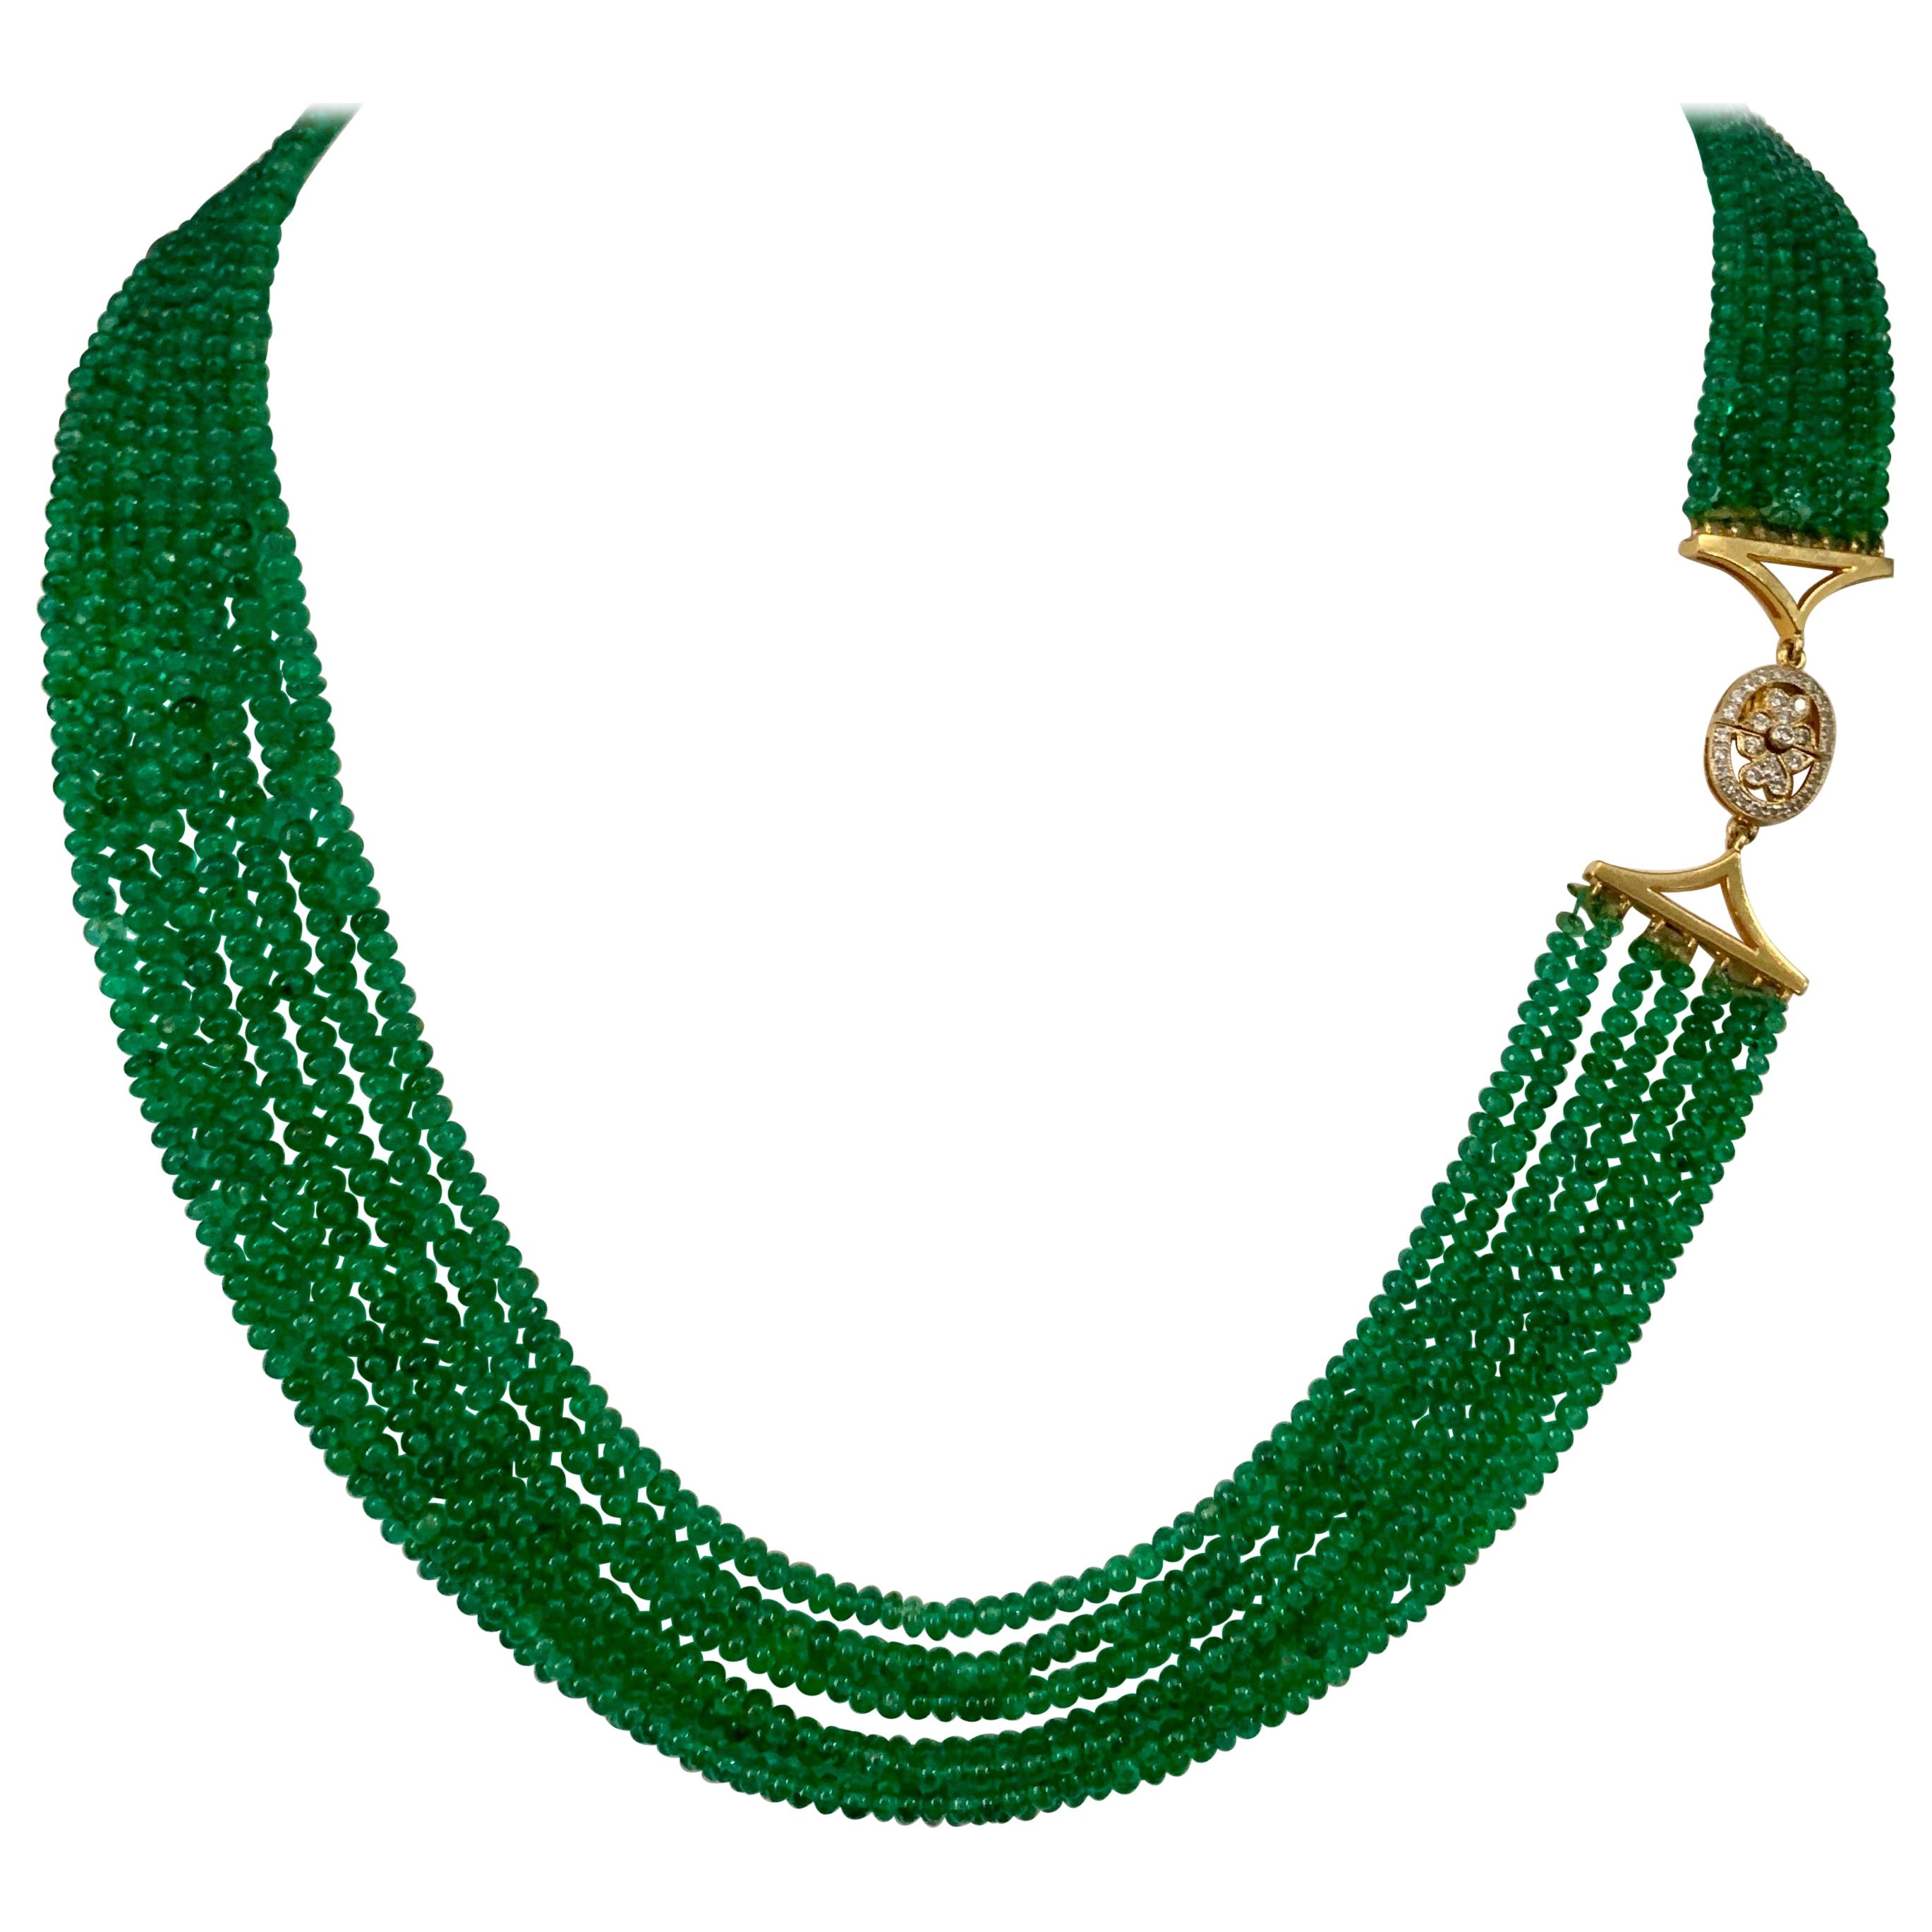 200 Carat Emerald Beads 7 Line Necklace with Diamond Clasp 18 Karat Yellow Gold For Sale